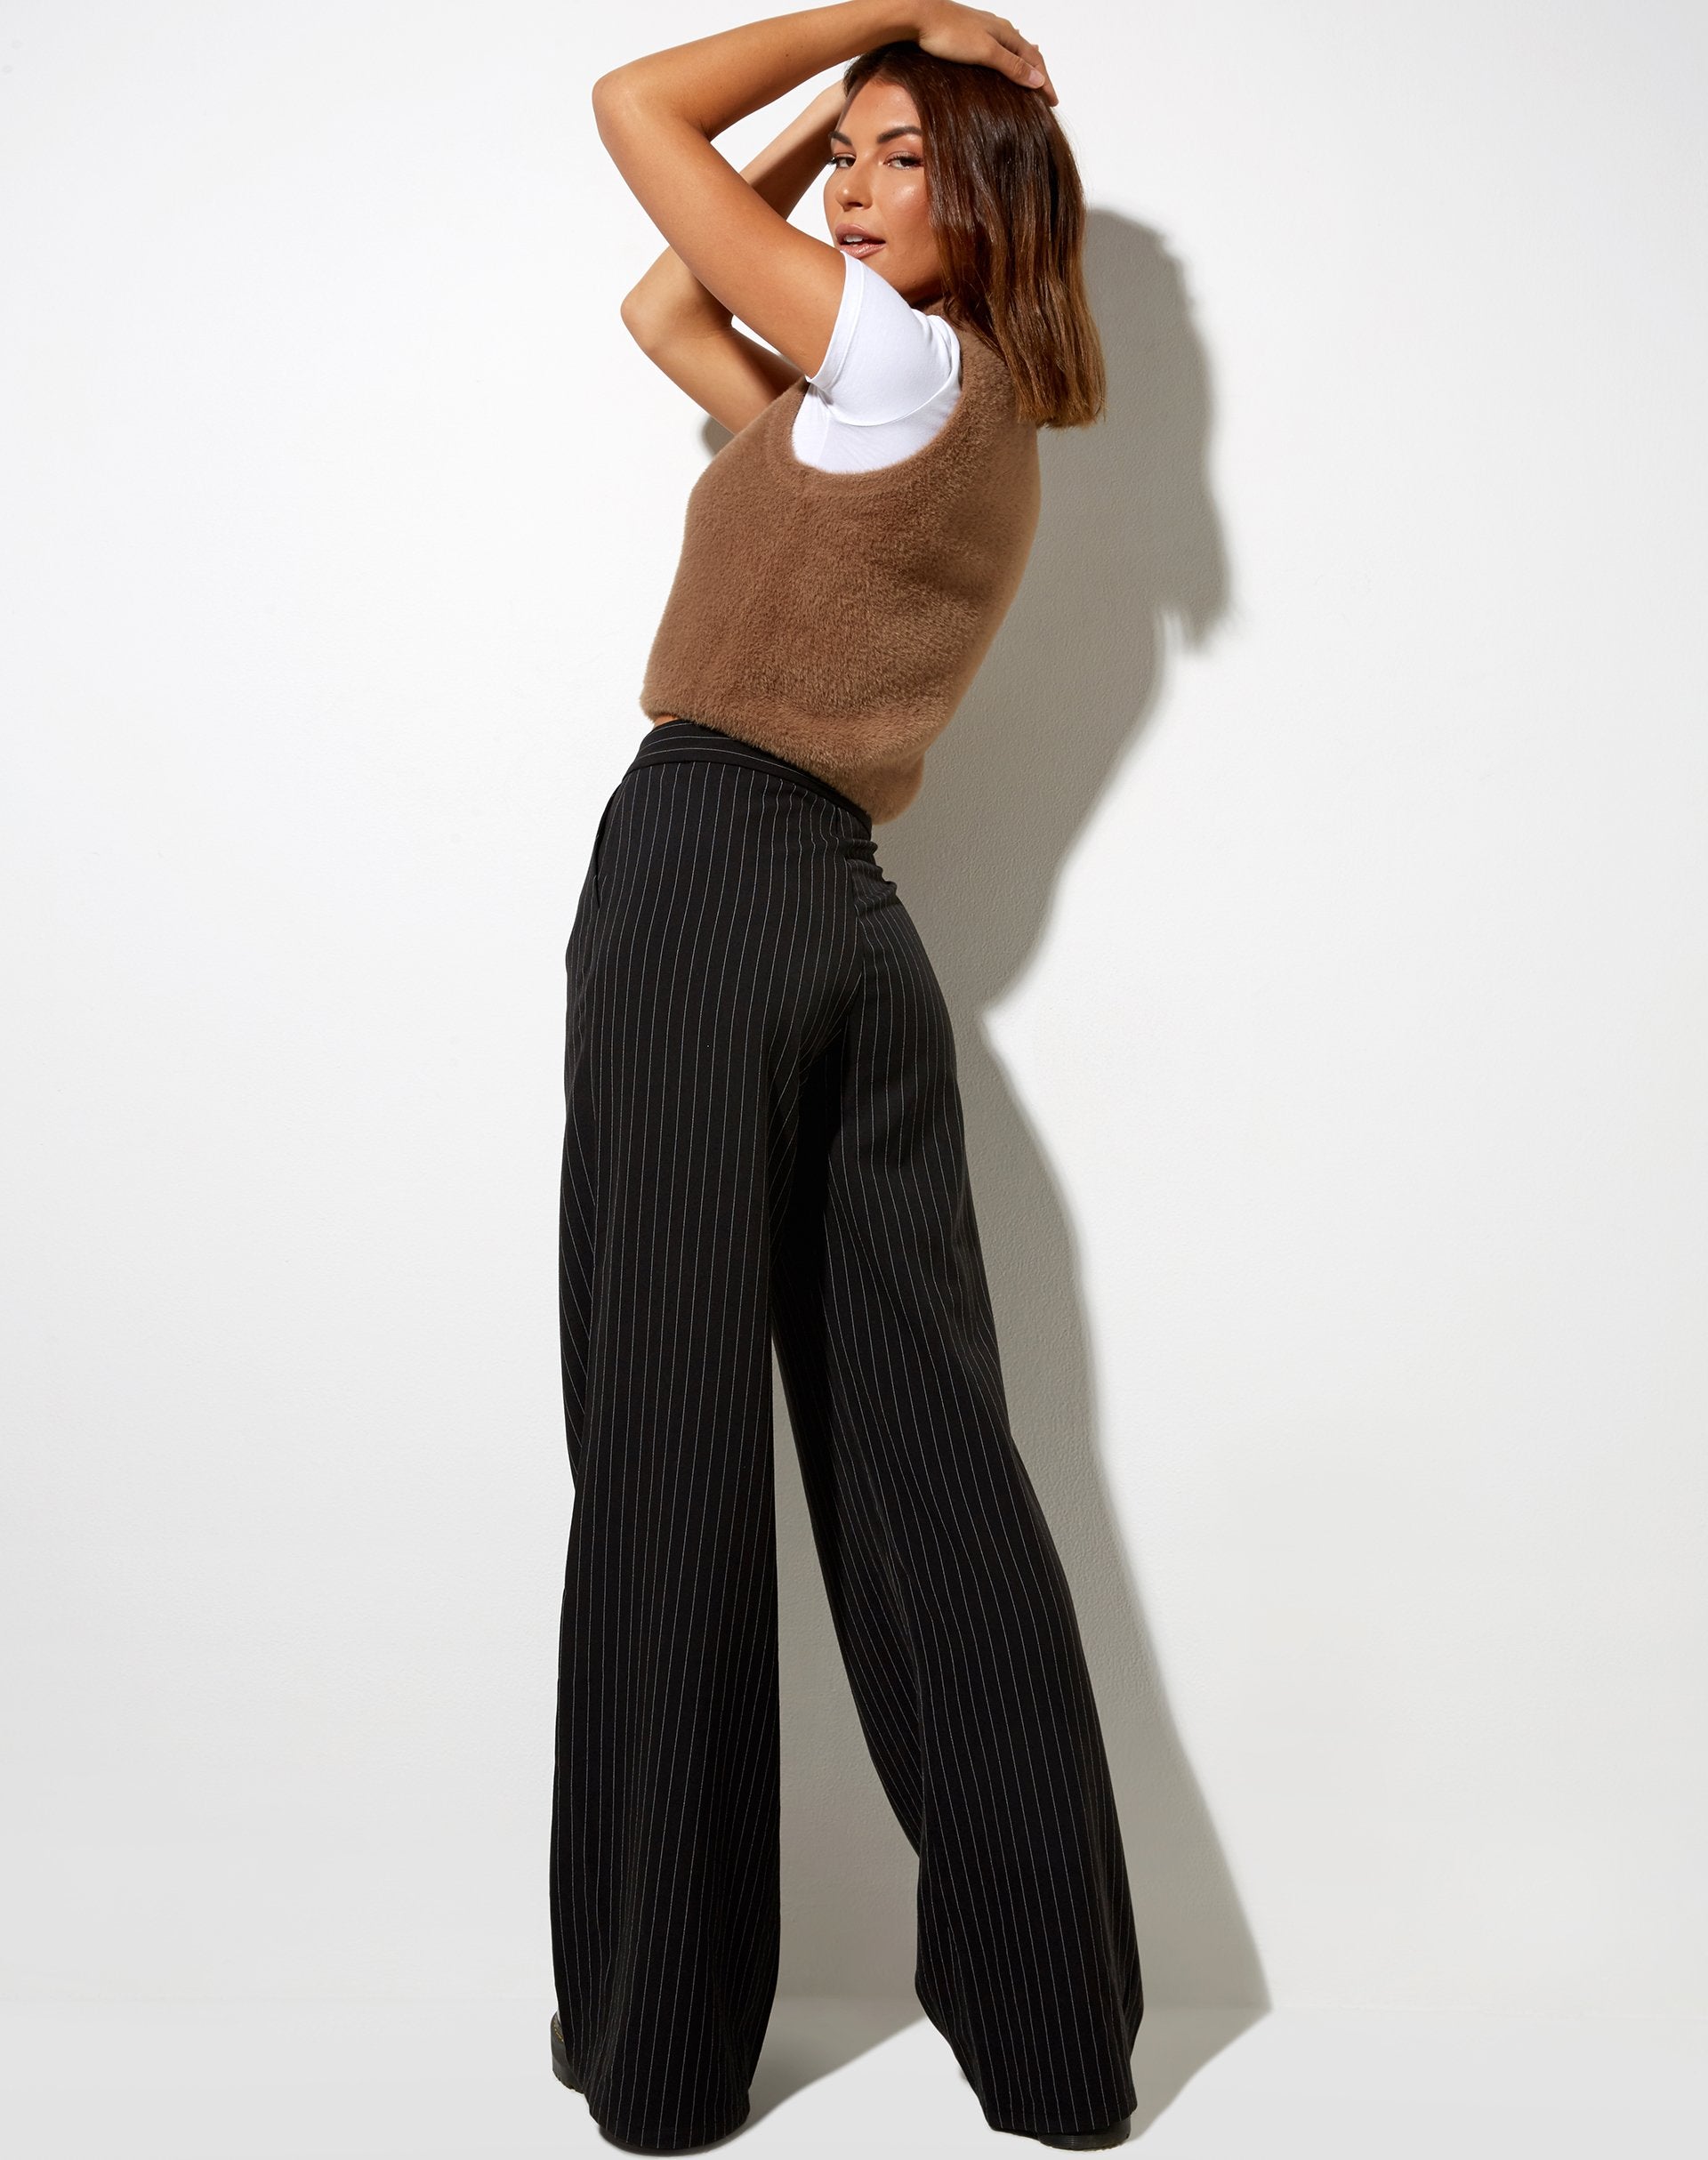 Image of Ivo Flare Trouser in Pinstripe Black